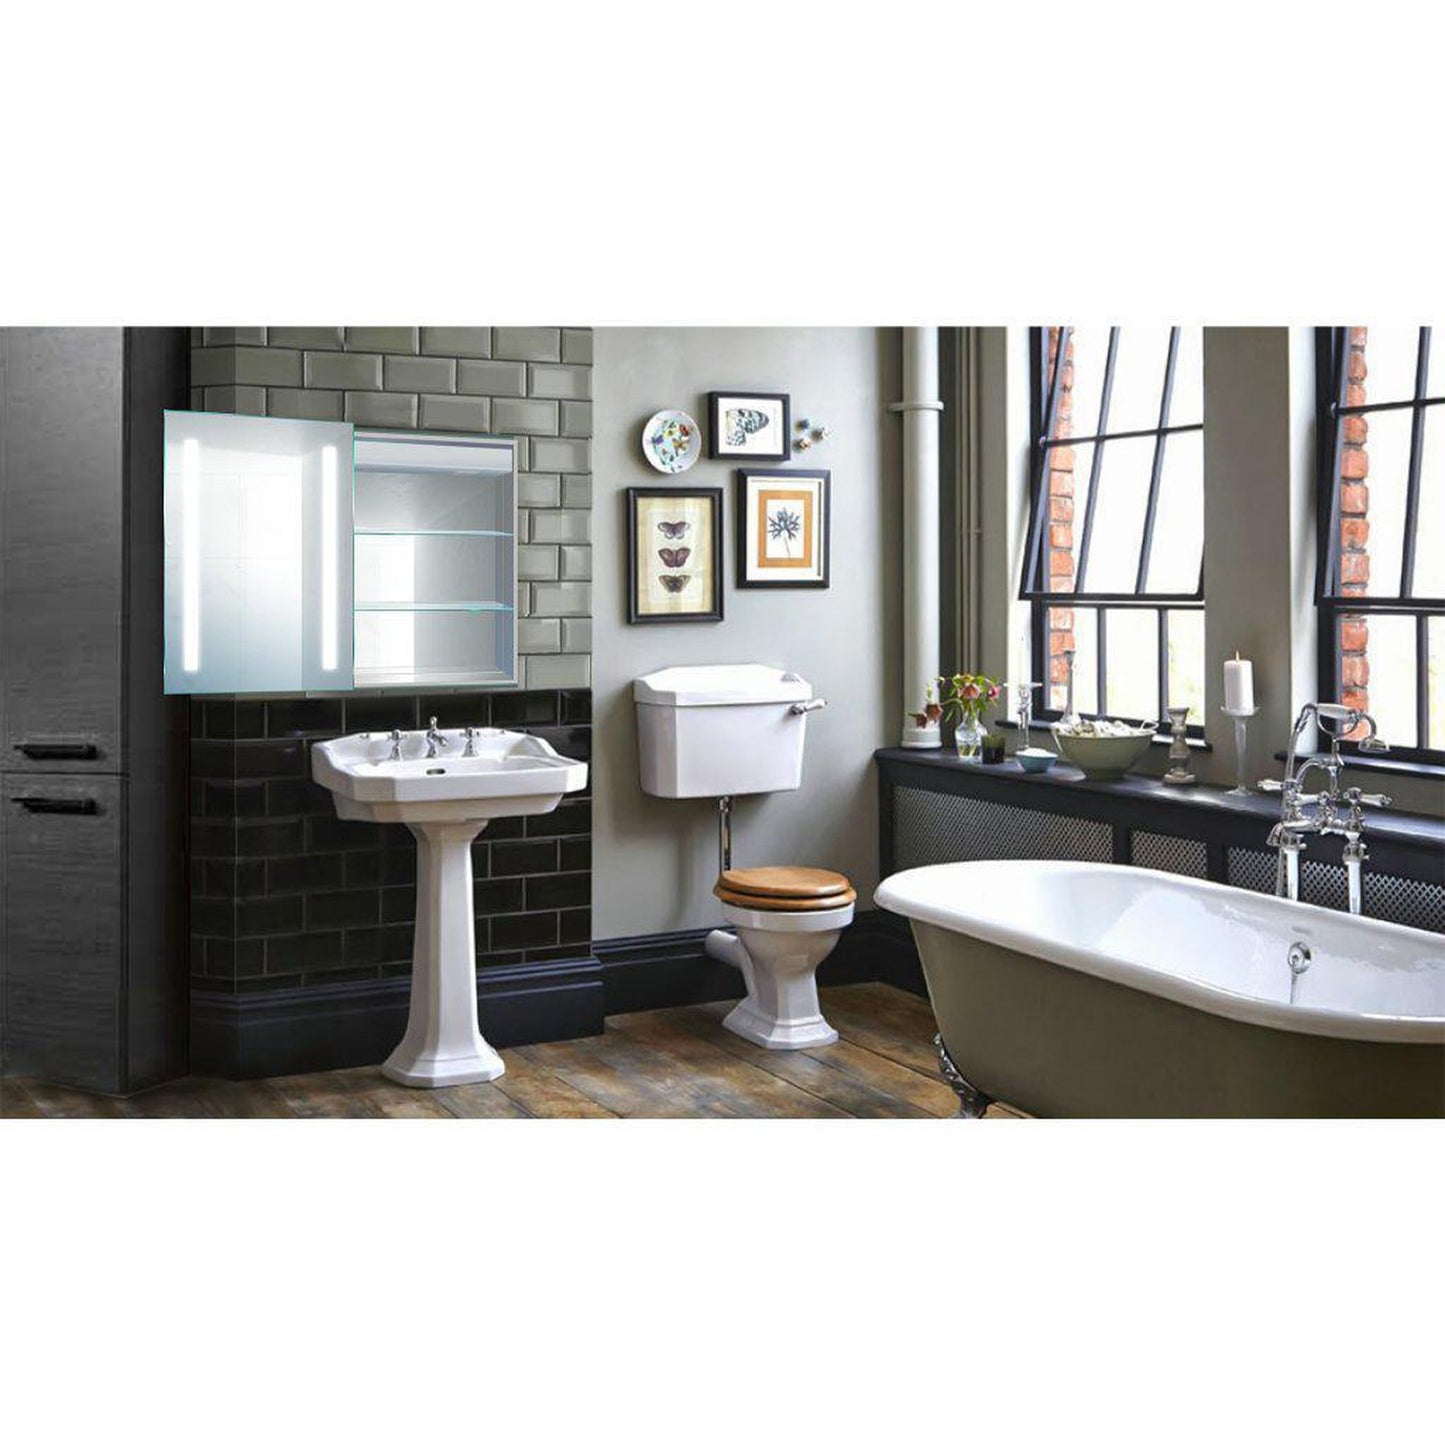 Krugg Reflections Rolls 20" x 30" Single Left Opening Rectangular Recessed/Surface-Mount Illuminated Silver Backed LED Medicine Cabinet Mirror With Built-in Defogger, Dimmer and Electrical Outlet